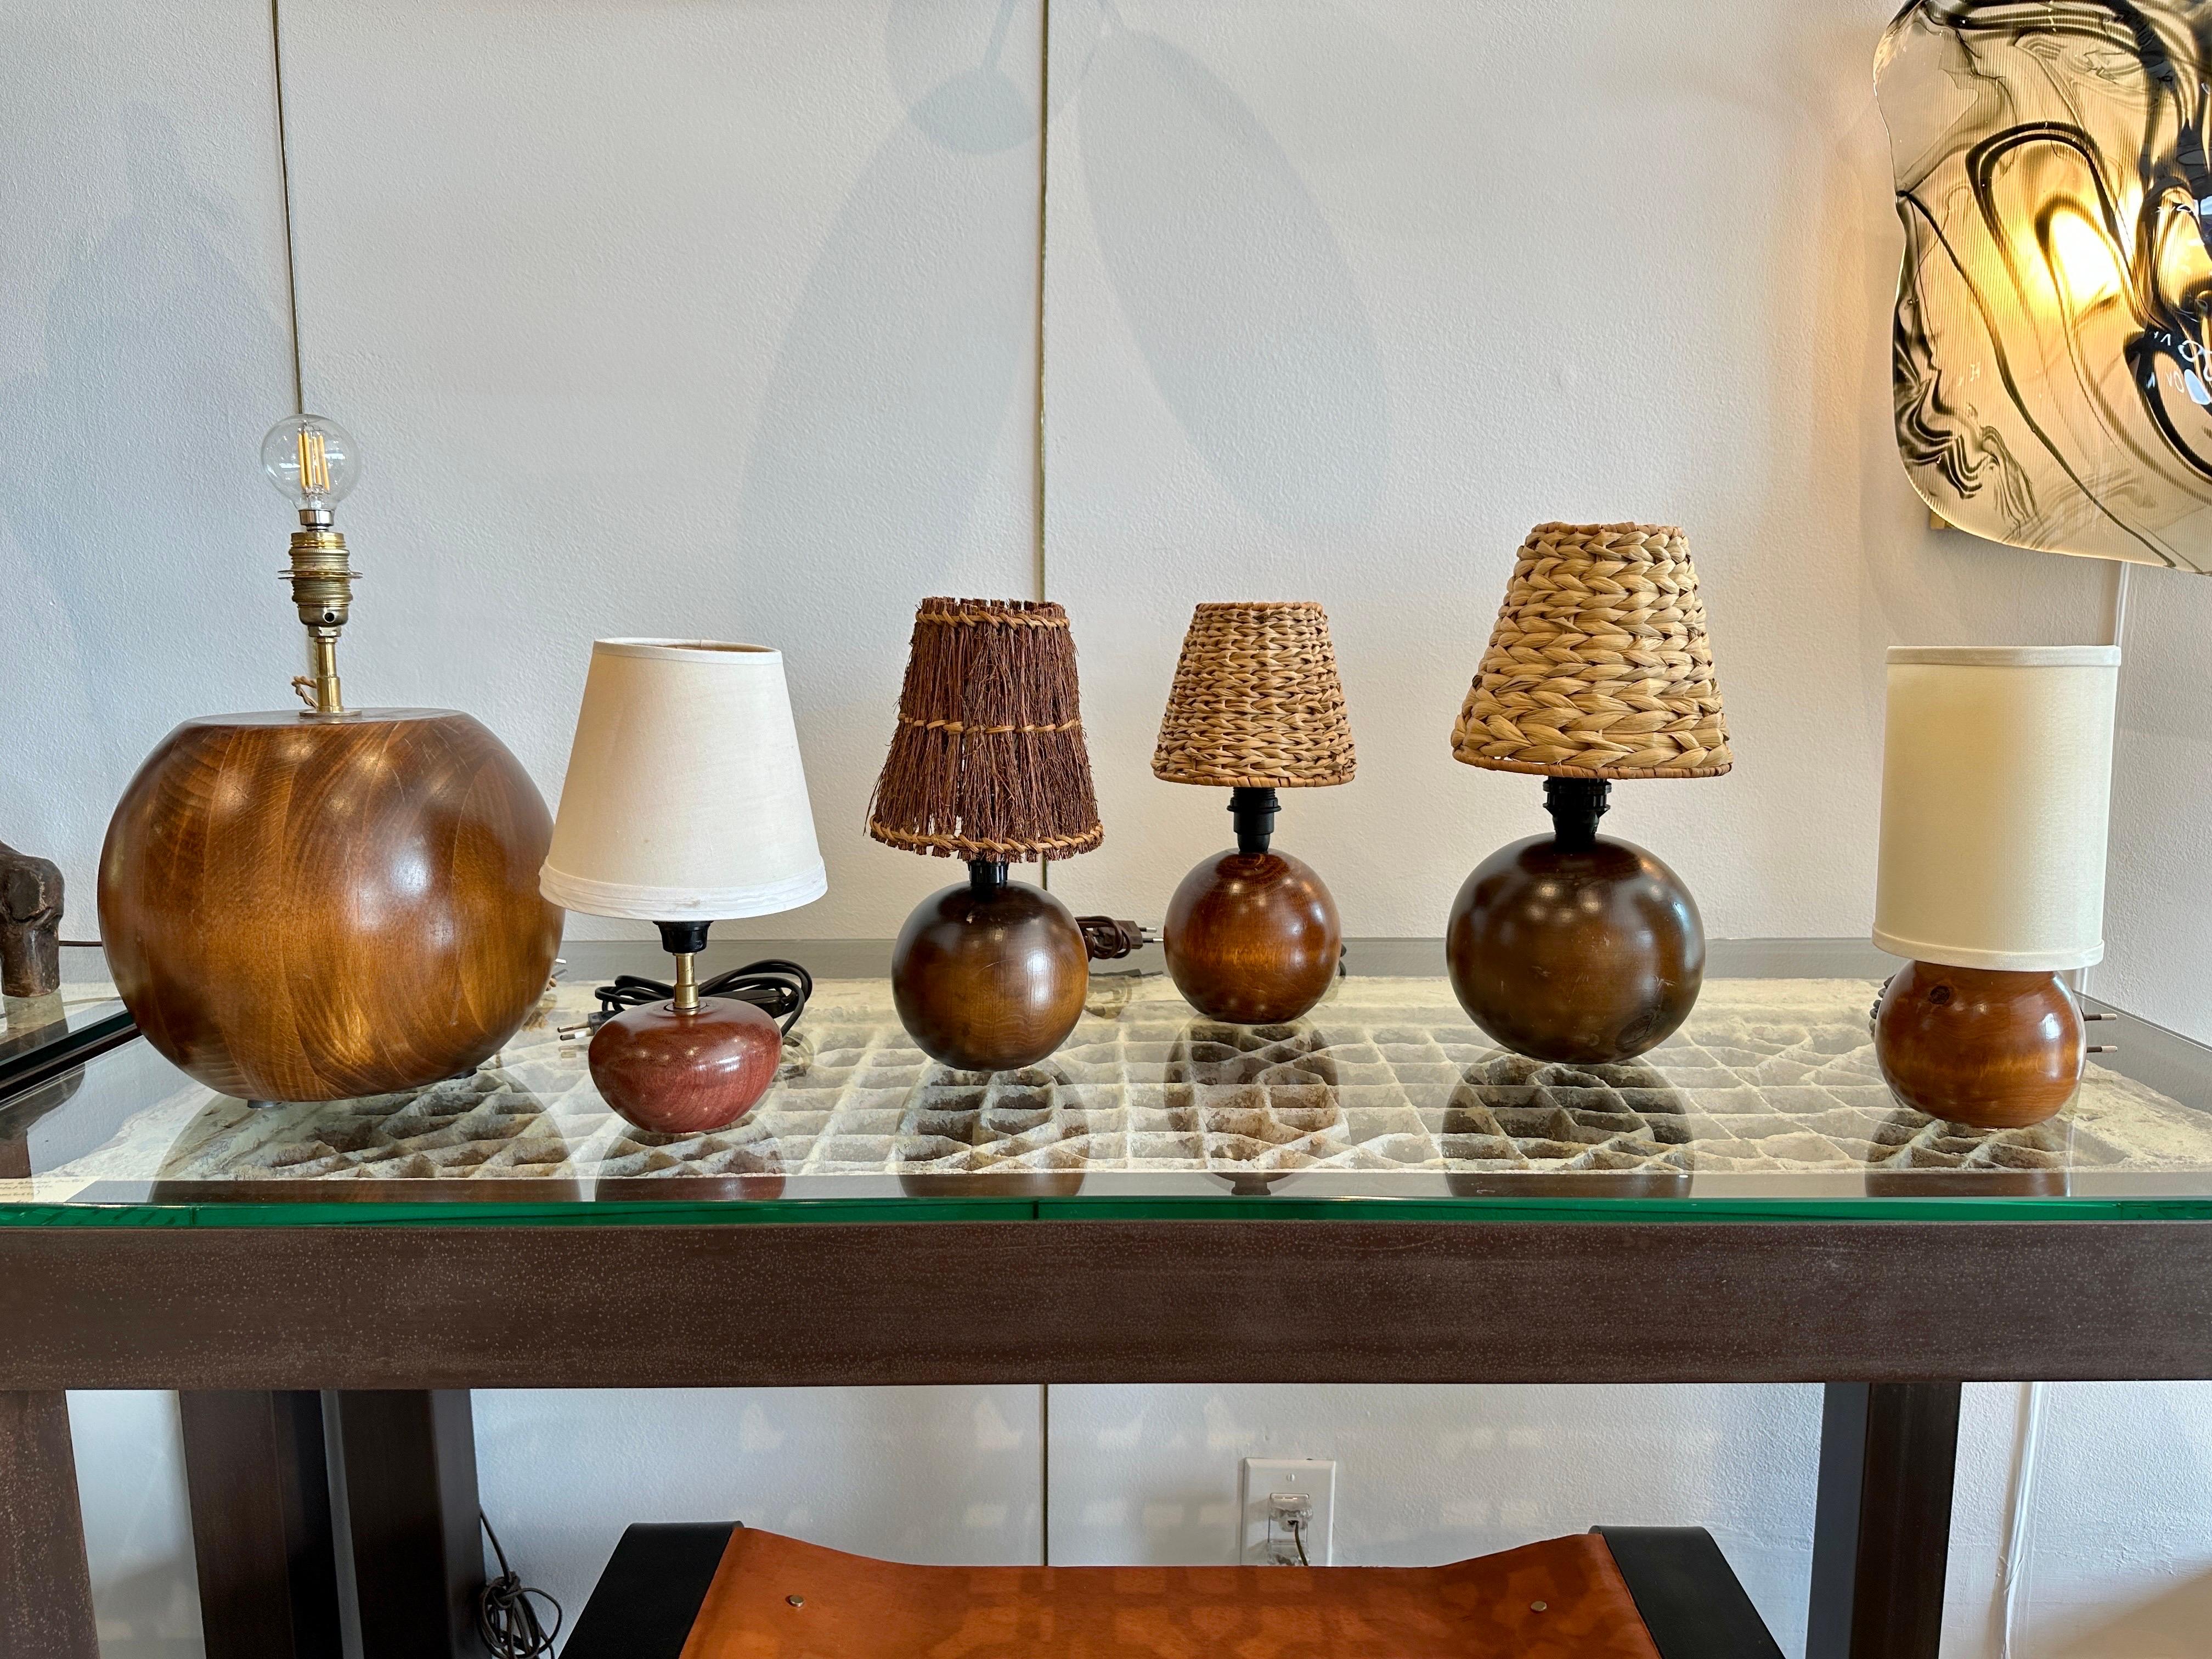 This globe form teak lamp is comprised of a solid chunk of teak wood formed by Scandinavian craftsmen to create this amazingly organic lamp. NOTE: there is an amazing grouping of these in varying sizes and varying shades - SEE DETAIL IMAGES. They